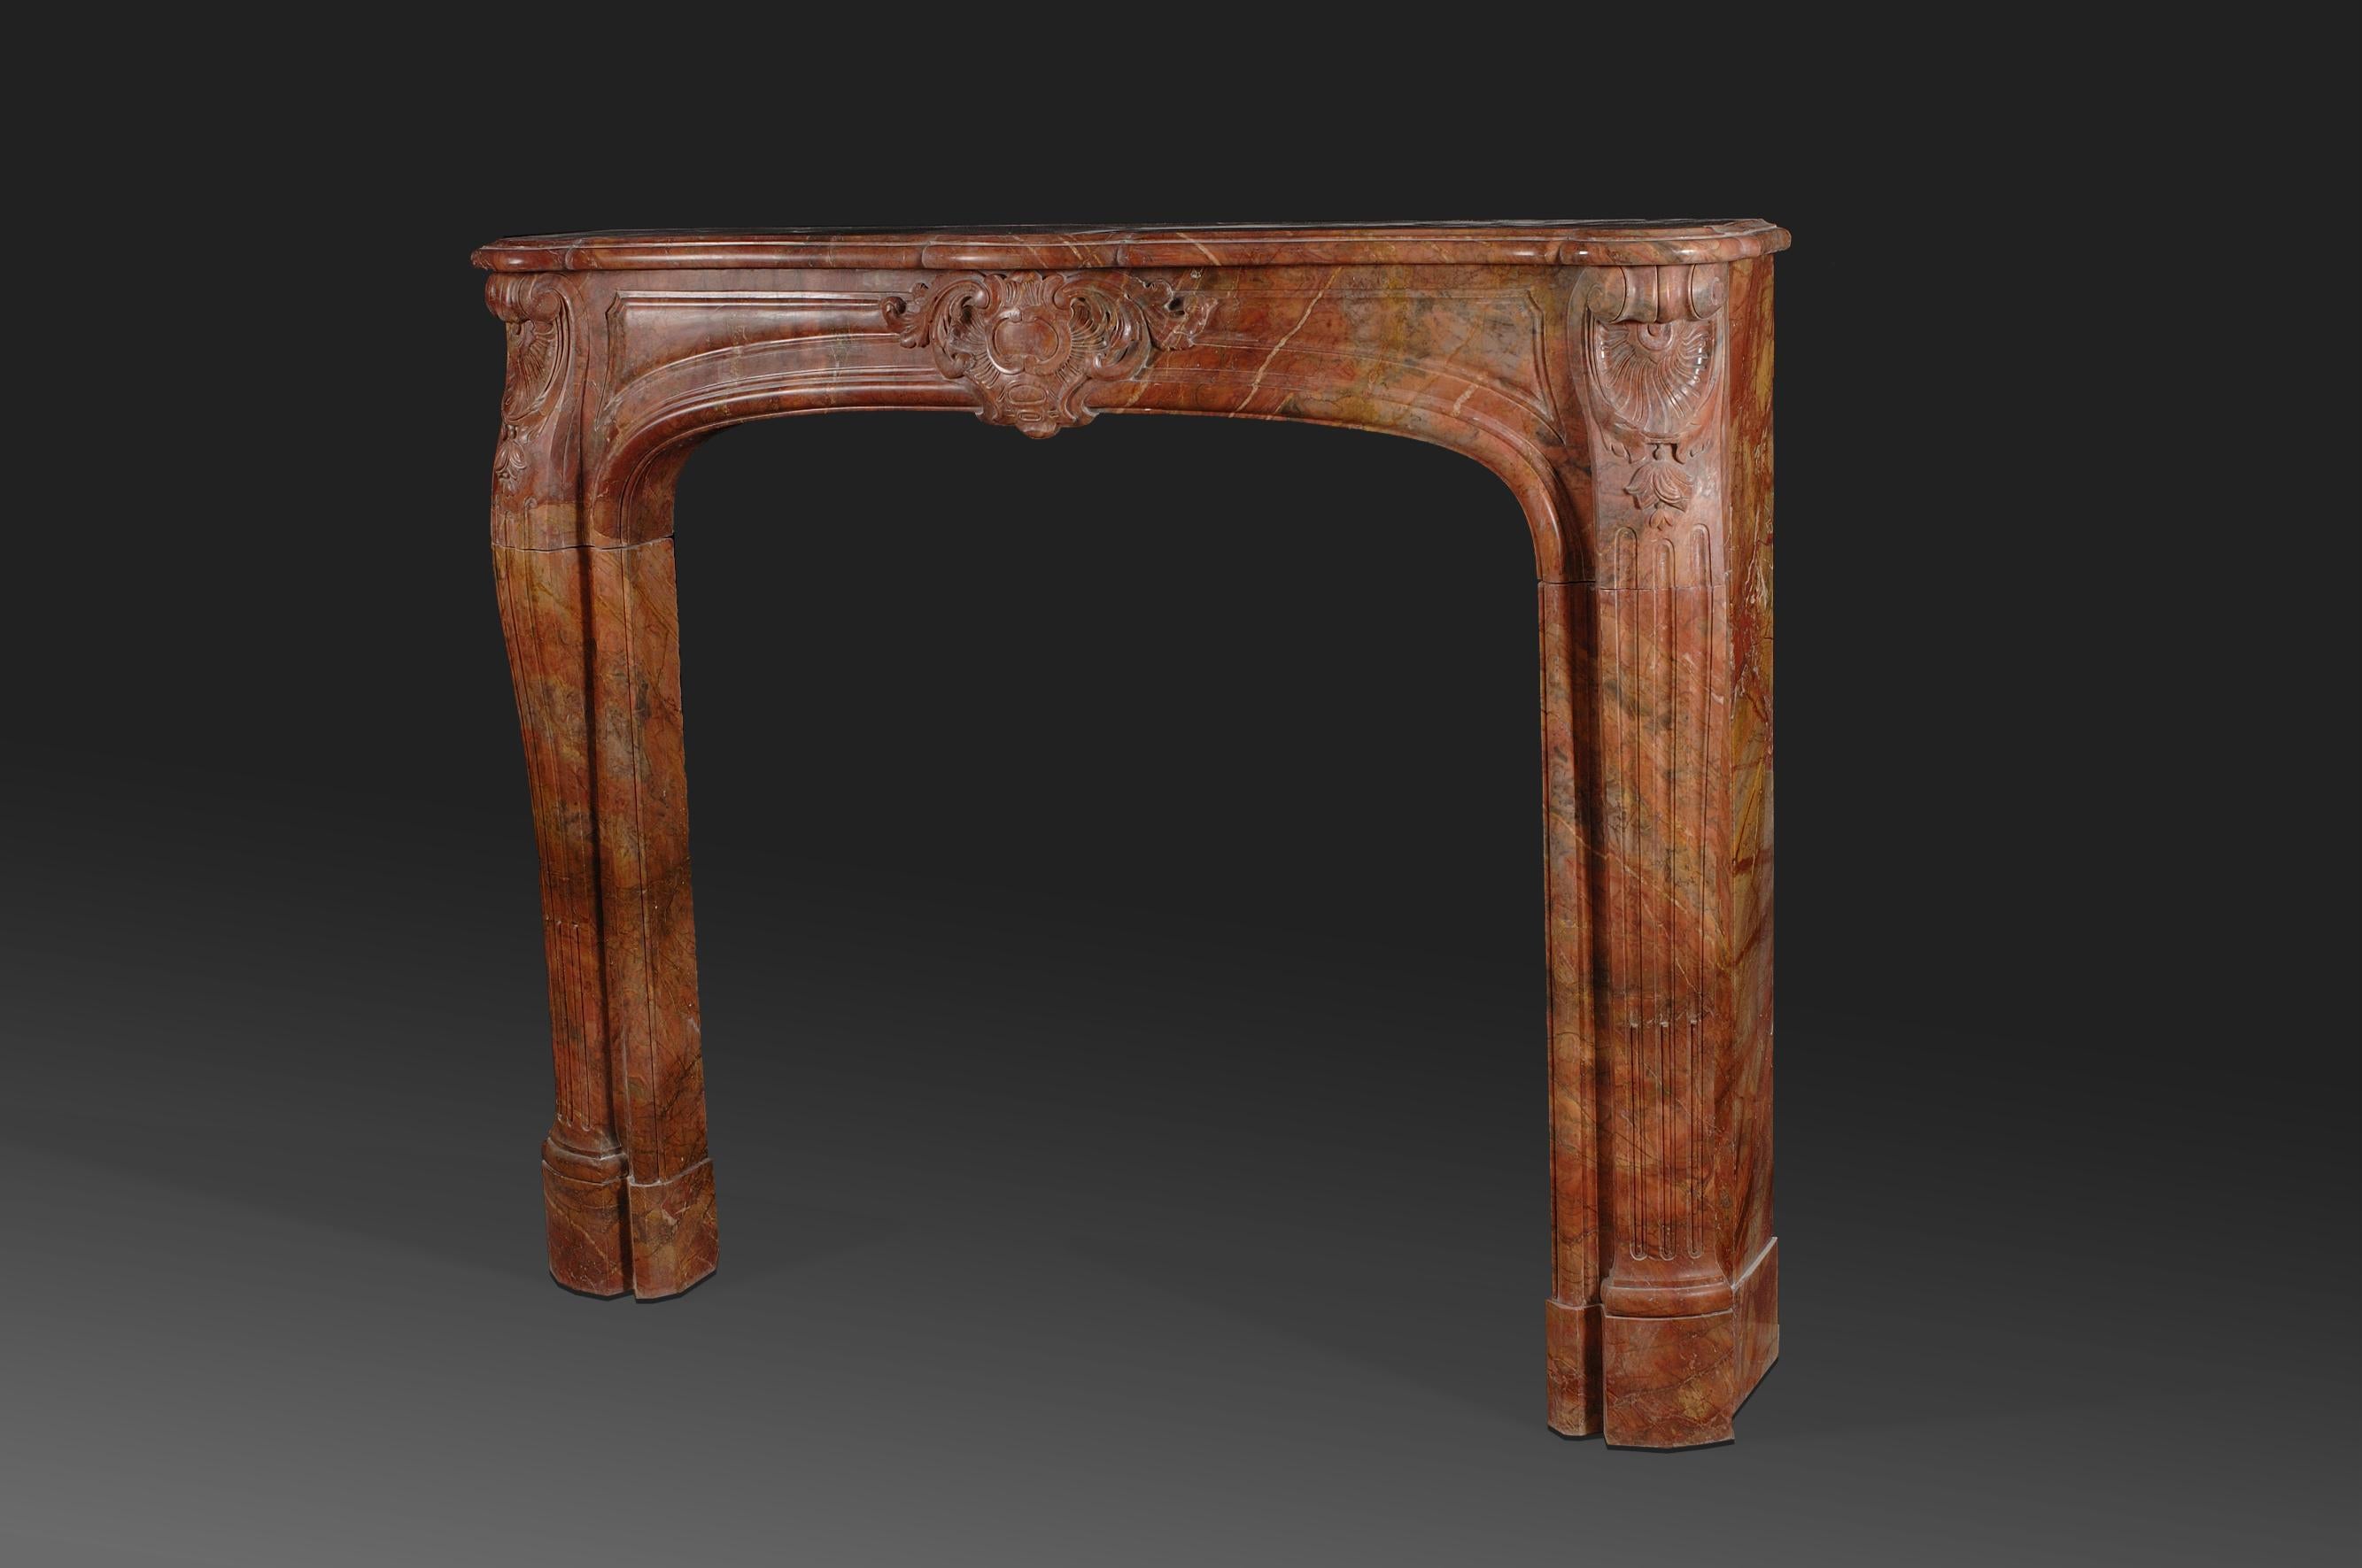 Louis XIV Finely carved Italian marble fireplace For Sale